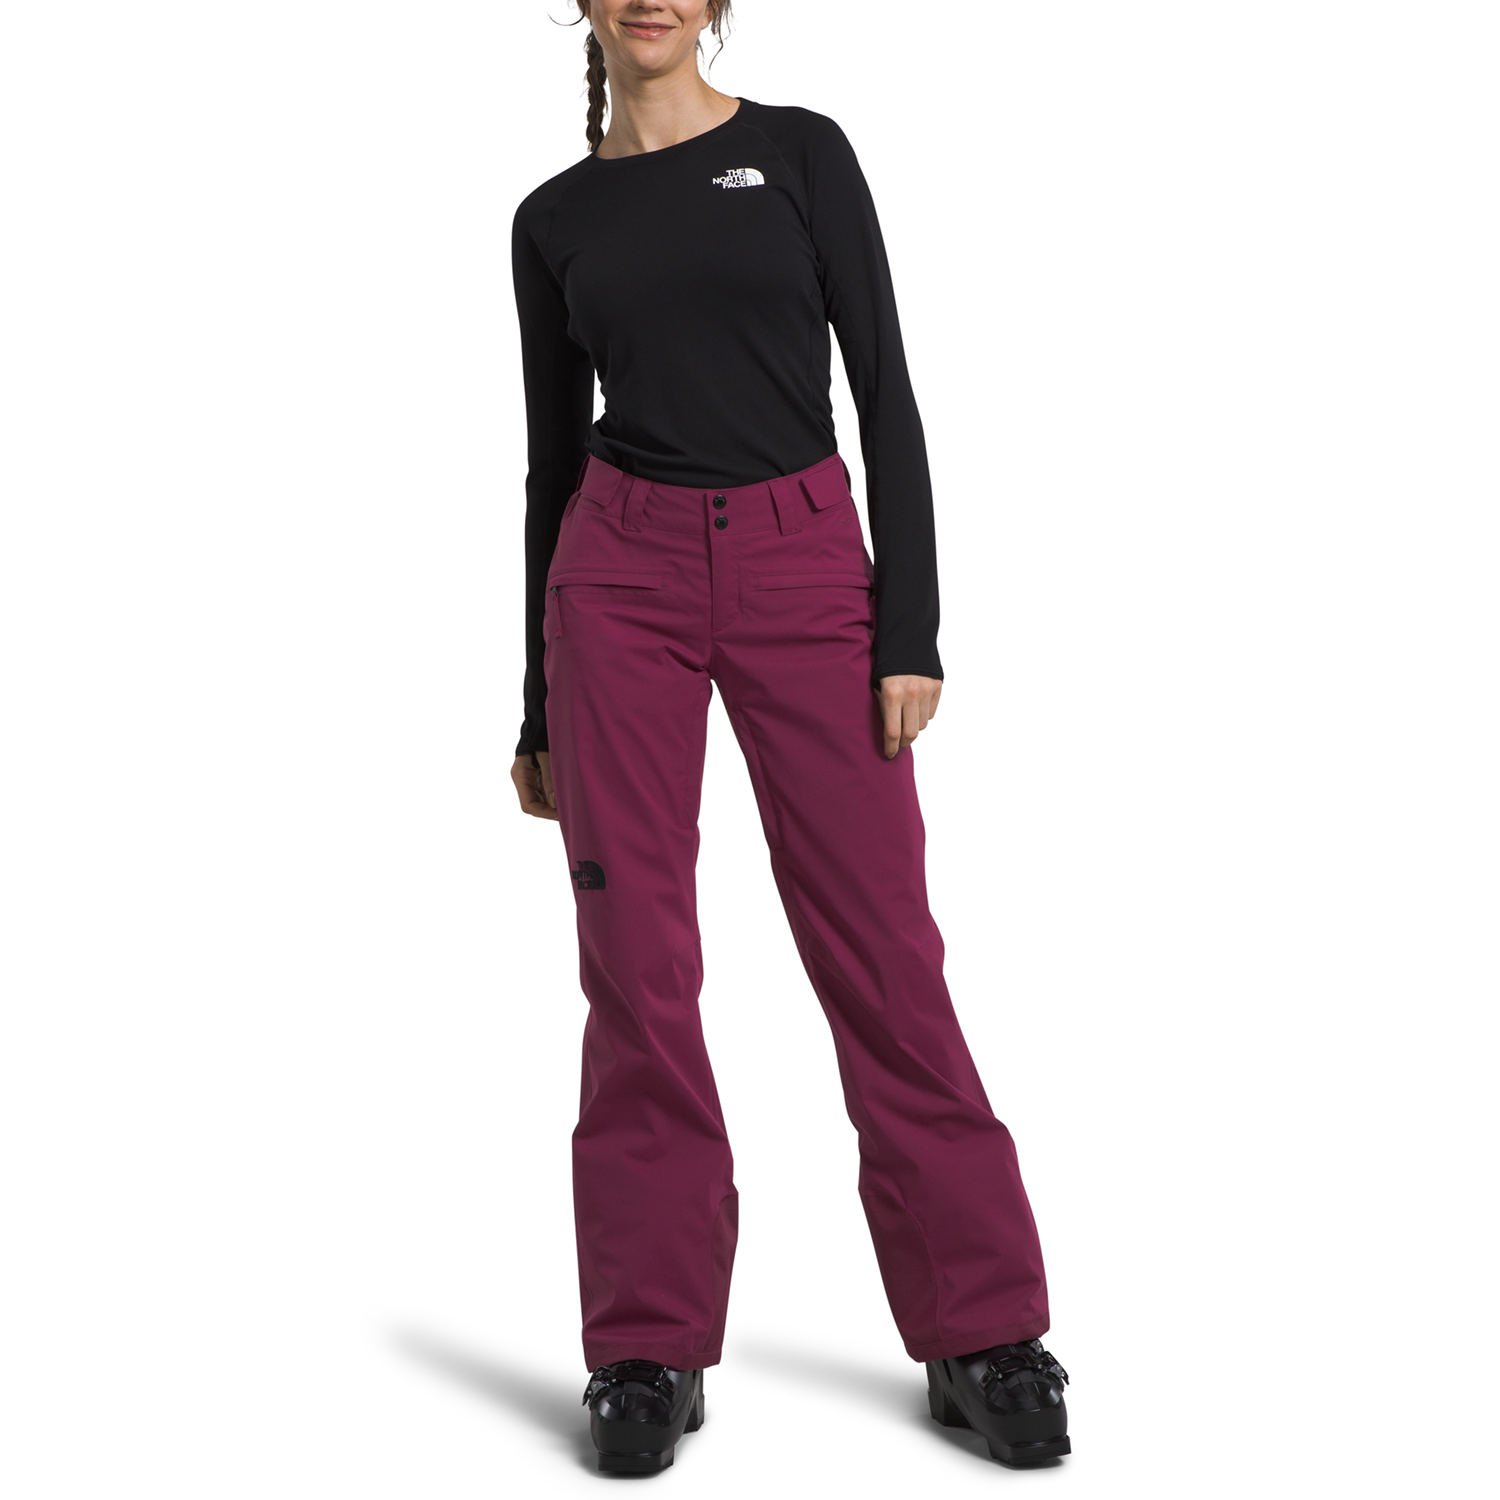 https://images.evo.com/imgp/zoom/238398/1058296/the-north-face-freedom-stretch-pants-women-s-.jpg